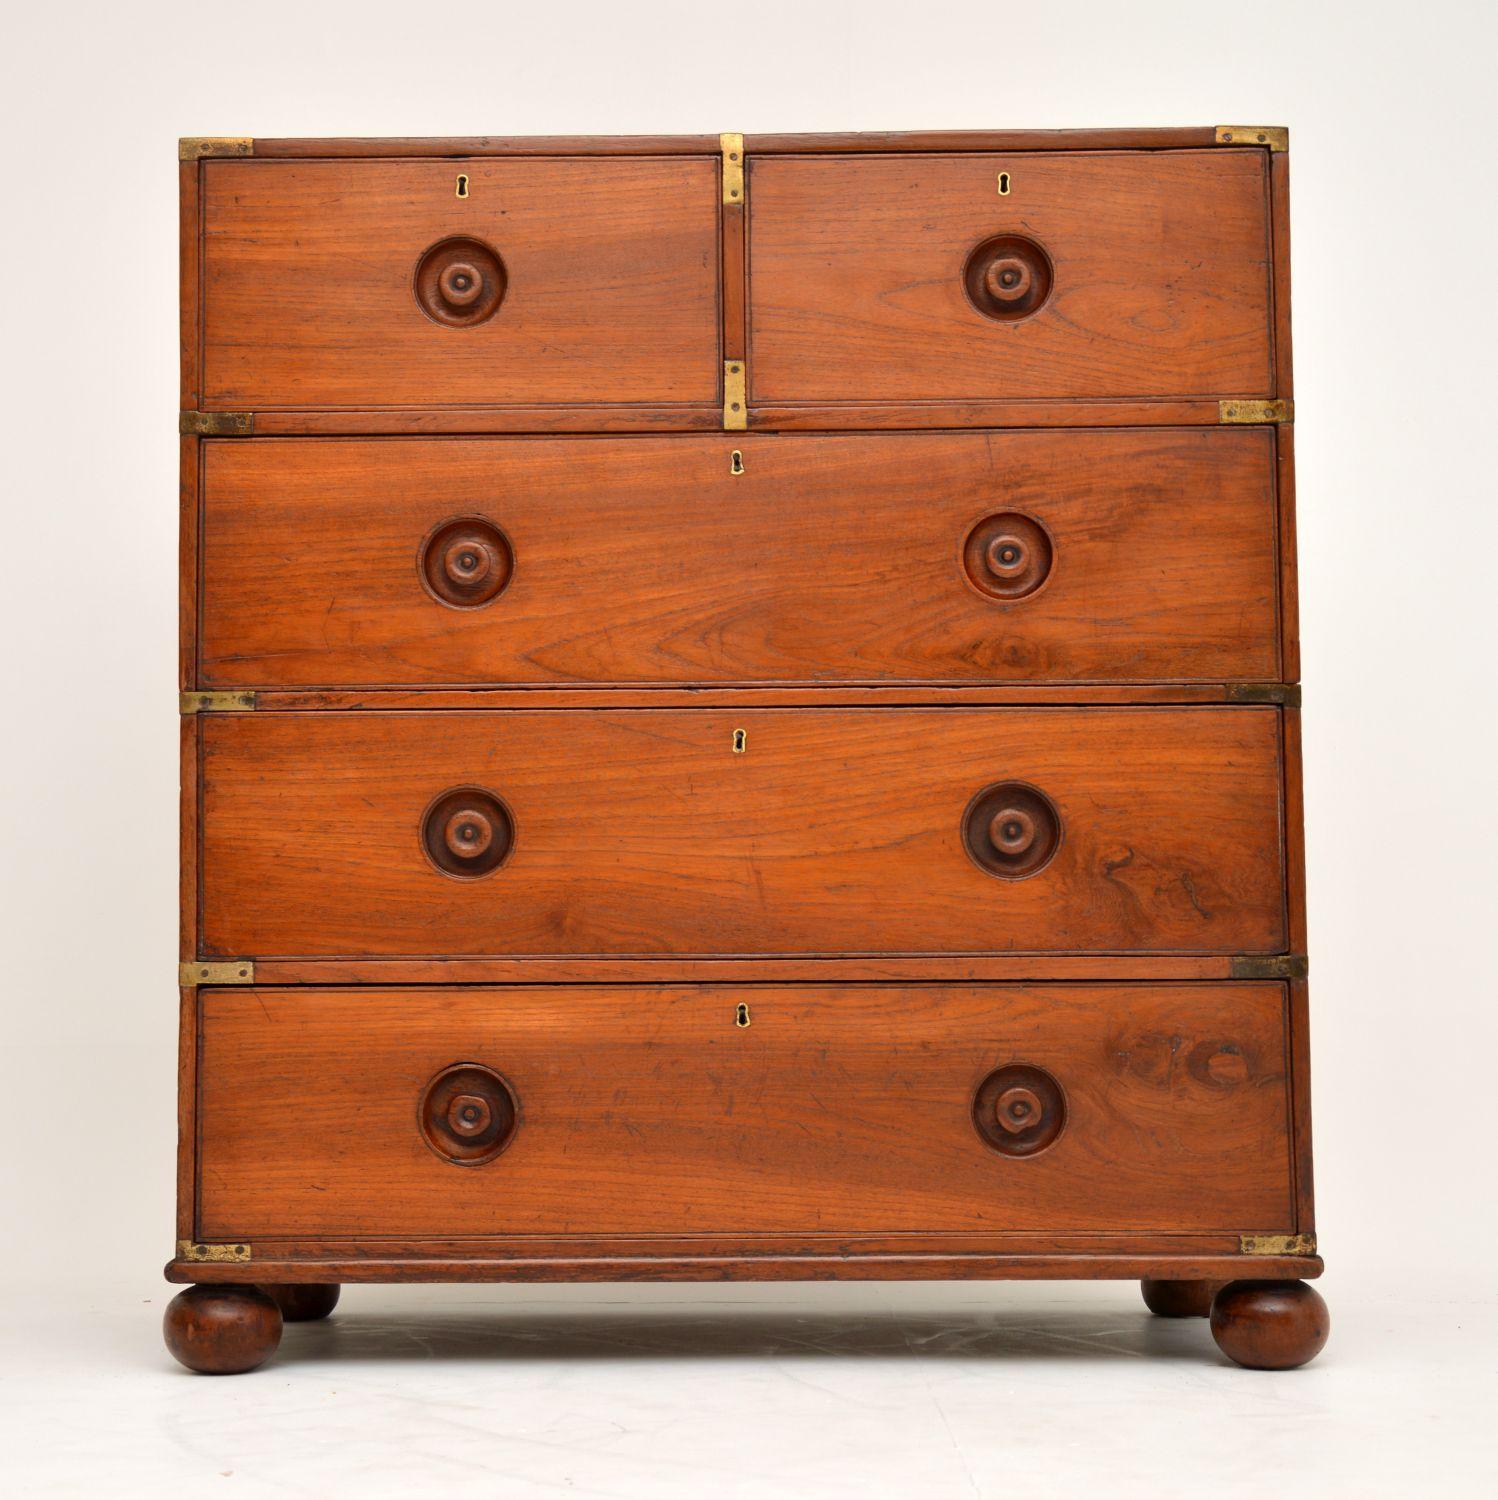 This is a very fine example of an antique Colonial military campaign chest of drawers in teak, dating to circa 1830s, with original turned sunken handles, which are quite a rare feature on these models.

It’s in very good original condition, with